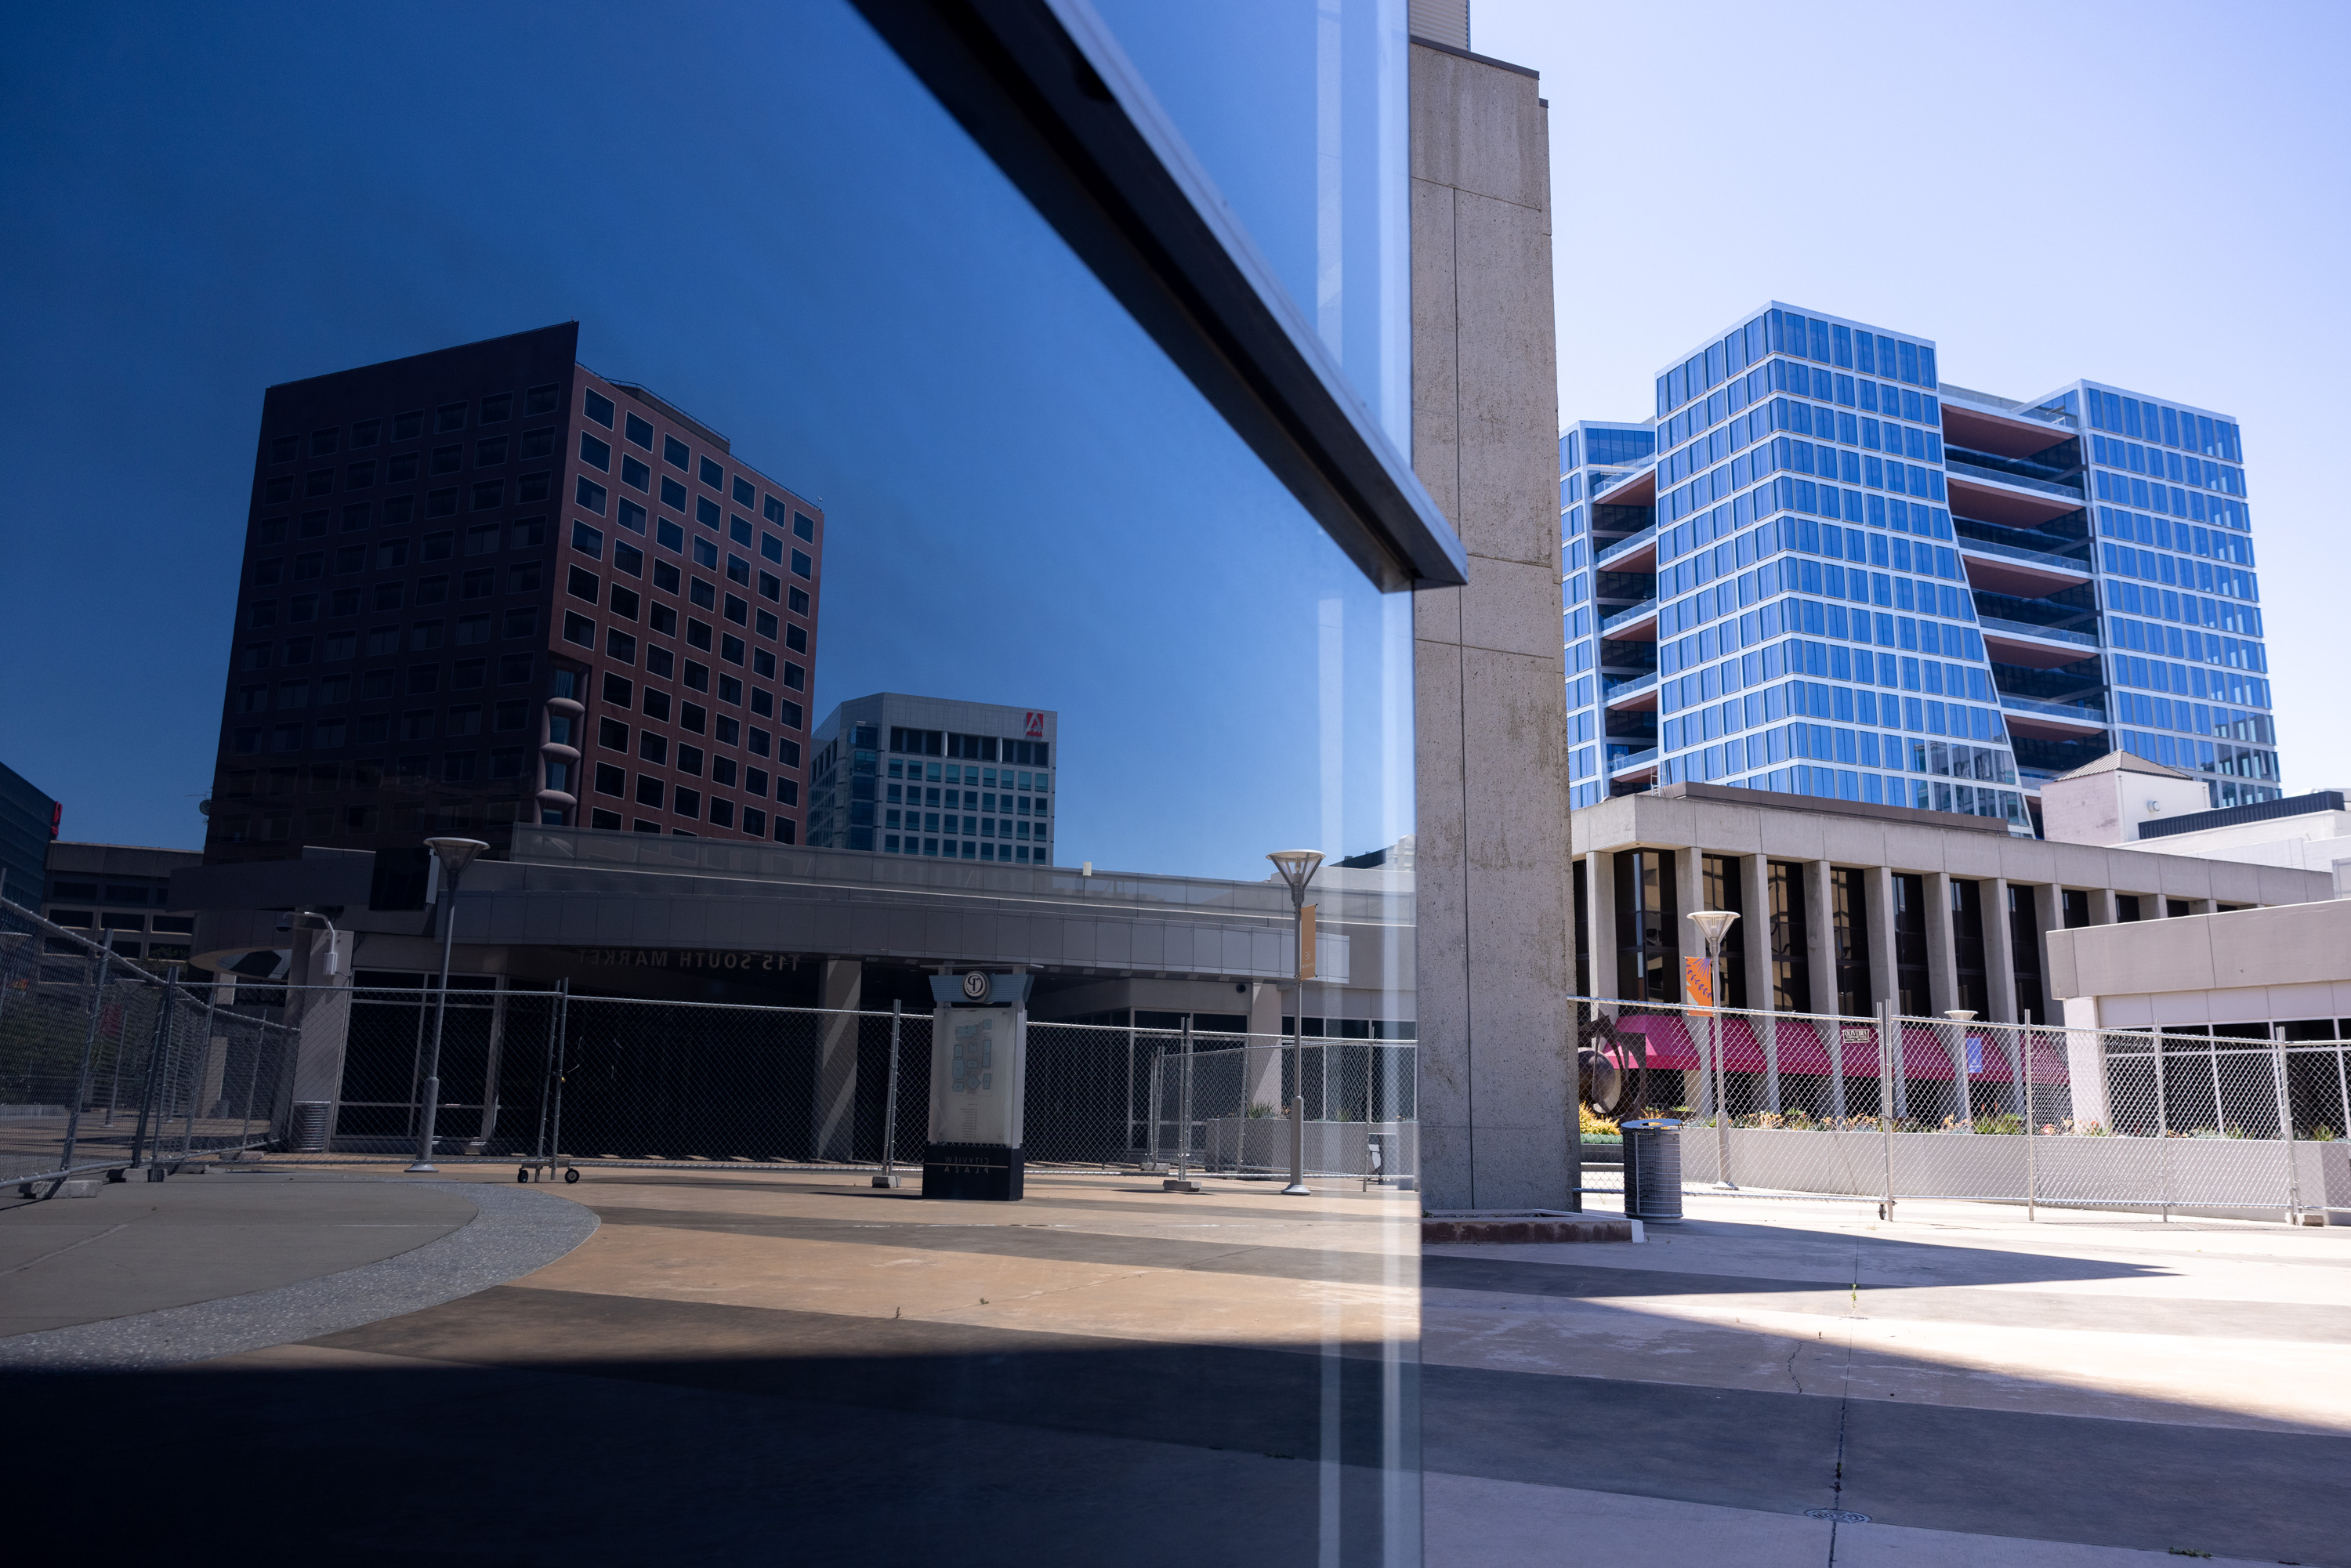 The image shows modern high-rise buildings with mirrored reflections, chain-link fences, and a clean, open concrete plaza under a clear blue sky.